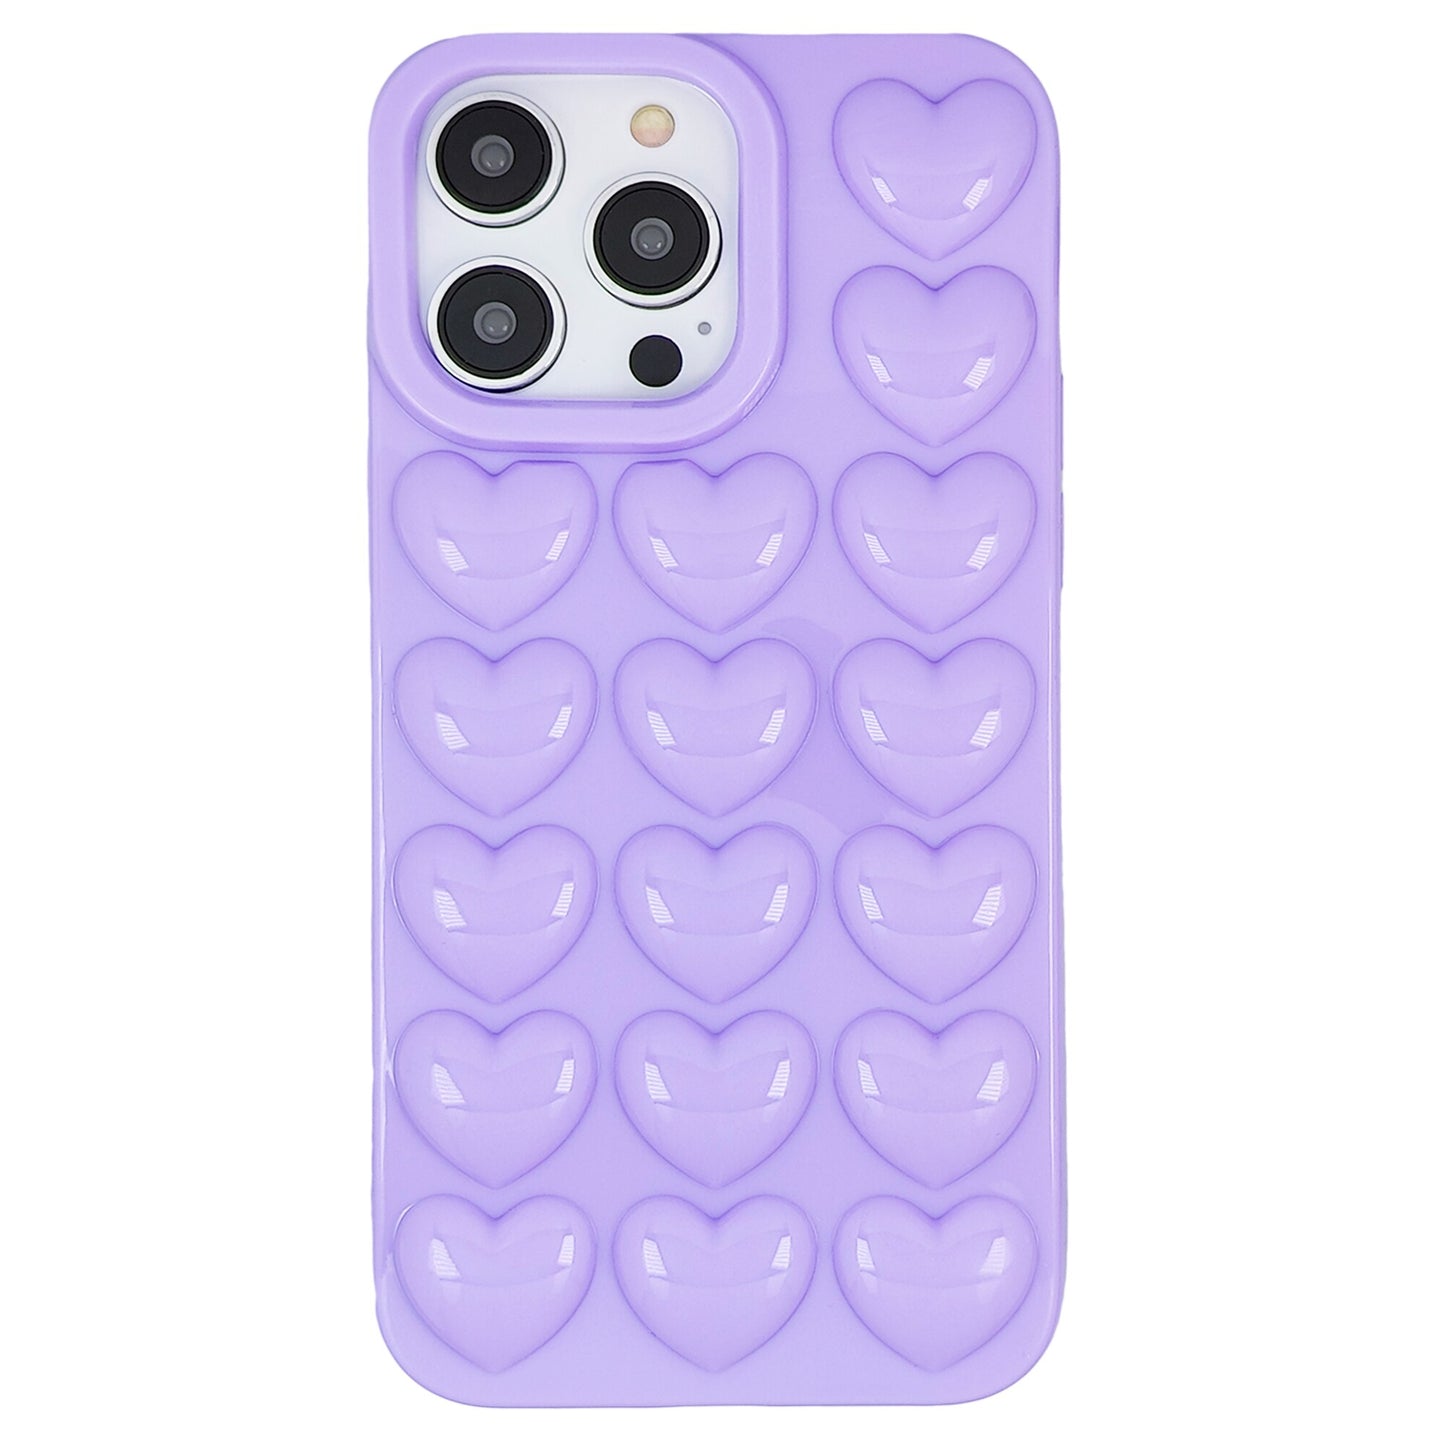 for iPhone 14 13 Pro Max Plus Mini Case 3D Bubble Pop Heart Super Cute Girly for Women Soft Cover Baby Pink Lavender Black Clear - For iPhone 14Pro Max / Purple / China - For iPhone 14 Pro / Purple / China - For iPhone 14 Plus / Purple / China - For iPhone 14 / Purple / China - For iPhone 13Pro Max / Purple / China - For iPhone 13 Pro / Purple / China - For iPhone 13 / Purple / China - For iPhone 13 Mini / Purple / China - For iPhone 14Pro Max / Purple / United States - For iPhone 14 Pro / Pu...